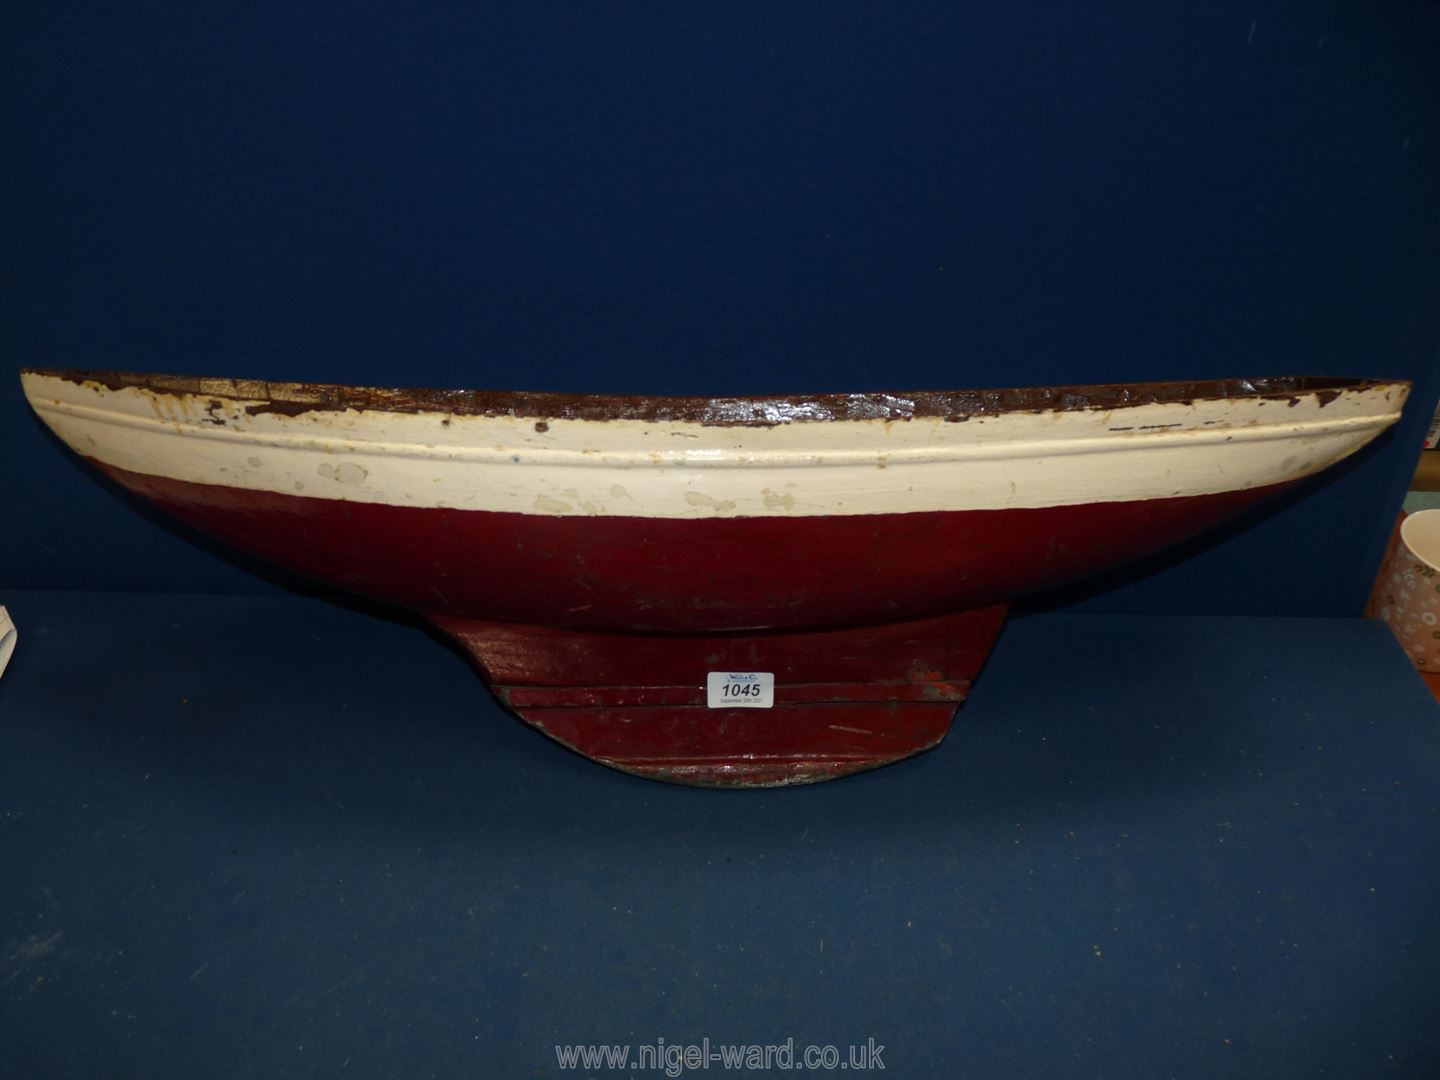 A hand carved red and white model boat, 30" long x 8" wide.